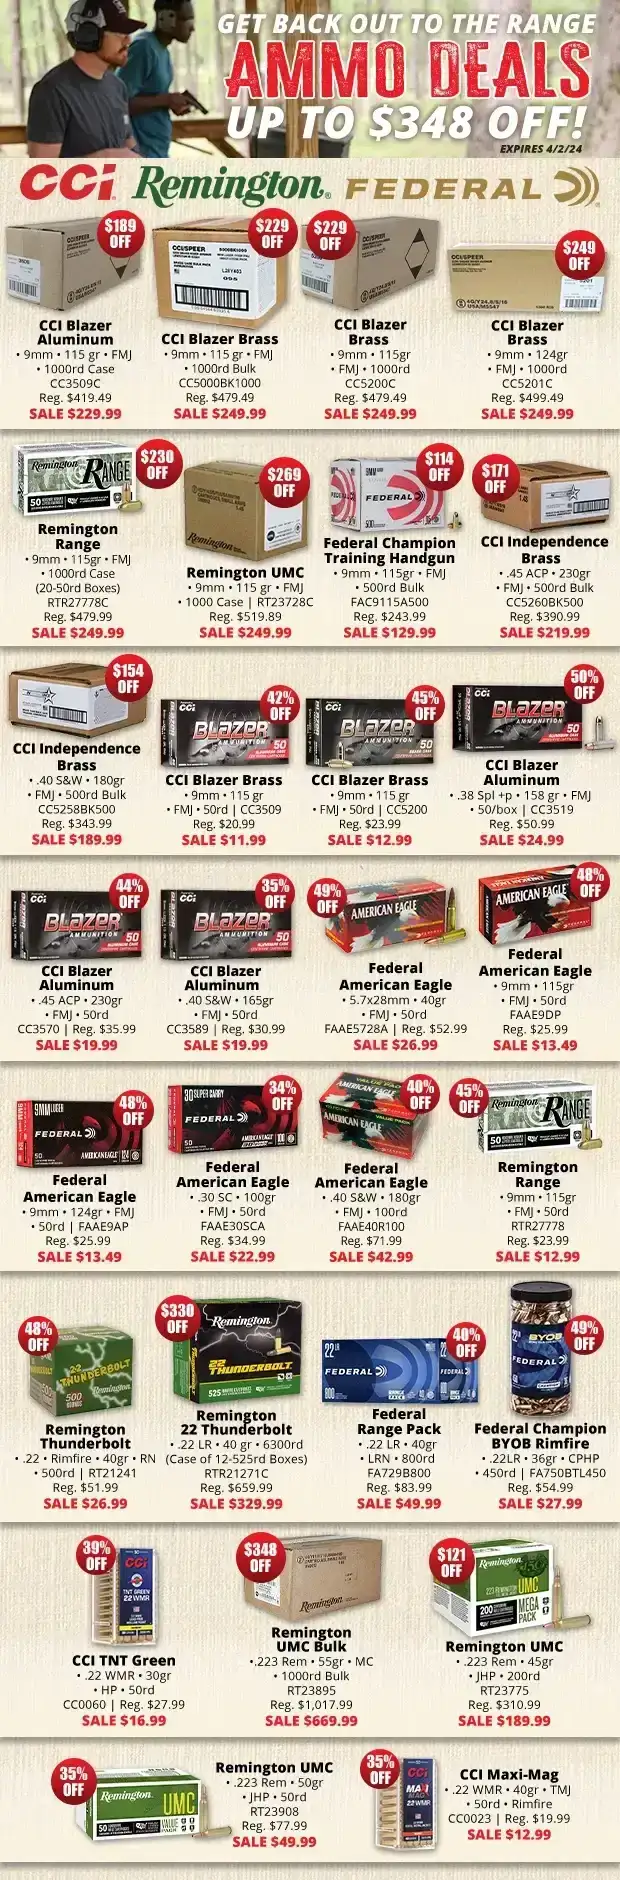 Up to \\$348 Off with Range Ready Ammo Deals!